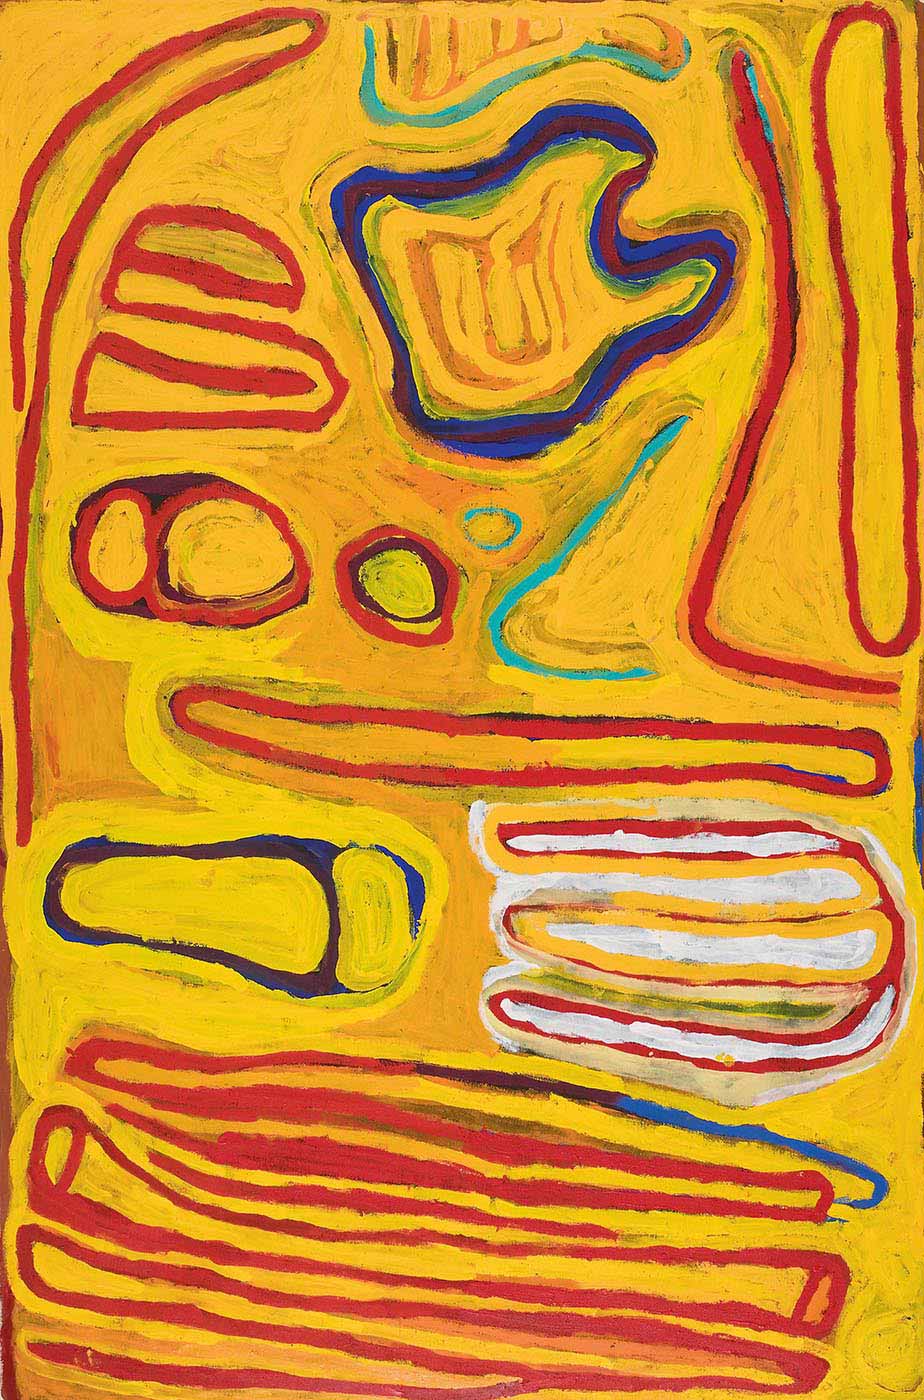 An acrylic painting on canvas of outlined motifs in bright colours on a predominantly yellow background. On one short side there is a red line motif that appears like uneven stripes with some connecting together. Next to that is a white, yellow and red three pronged motif and a blue pear shape overlaid with two yellow ovals. In the central section there is a red long thin outlined oblong, and at the other shortest end there are circles, V shapes in green and outlined shapes in red at both corners with a blue outlined shape between them. - click to view larger image